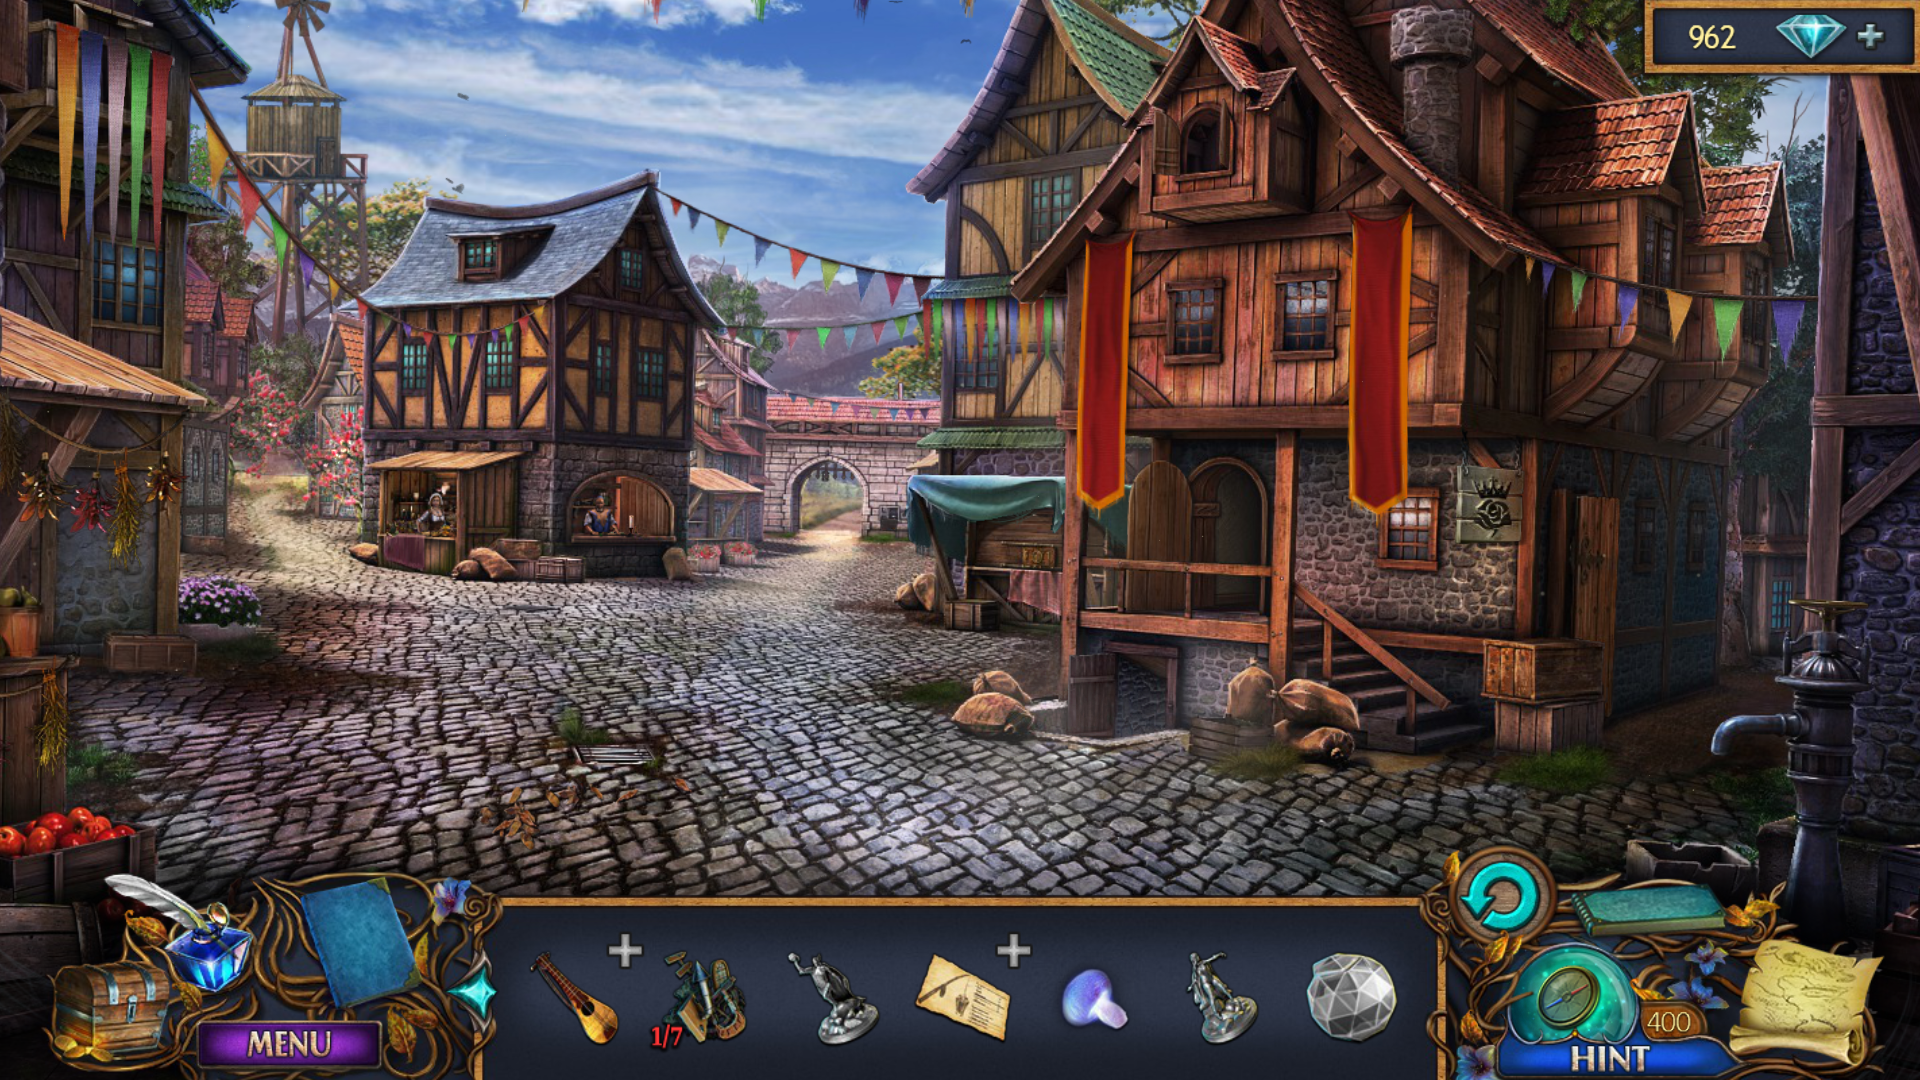 Screenshot 1 of Lost Chronicles 1.0.1.1381.343